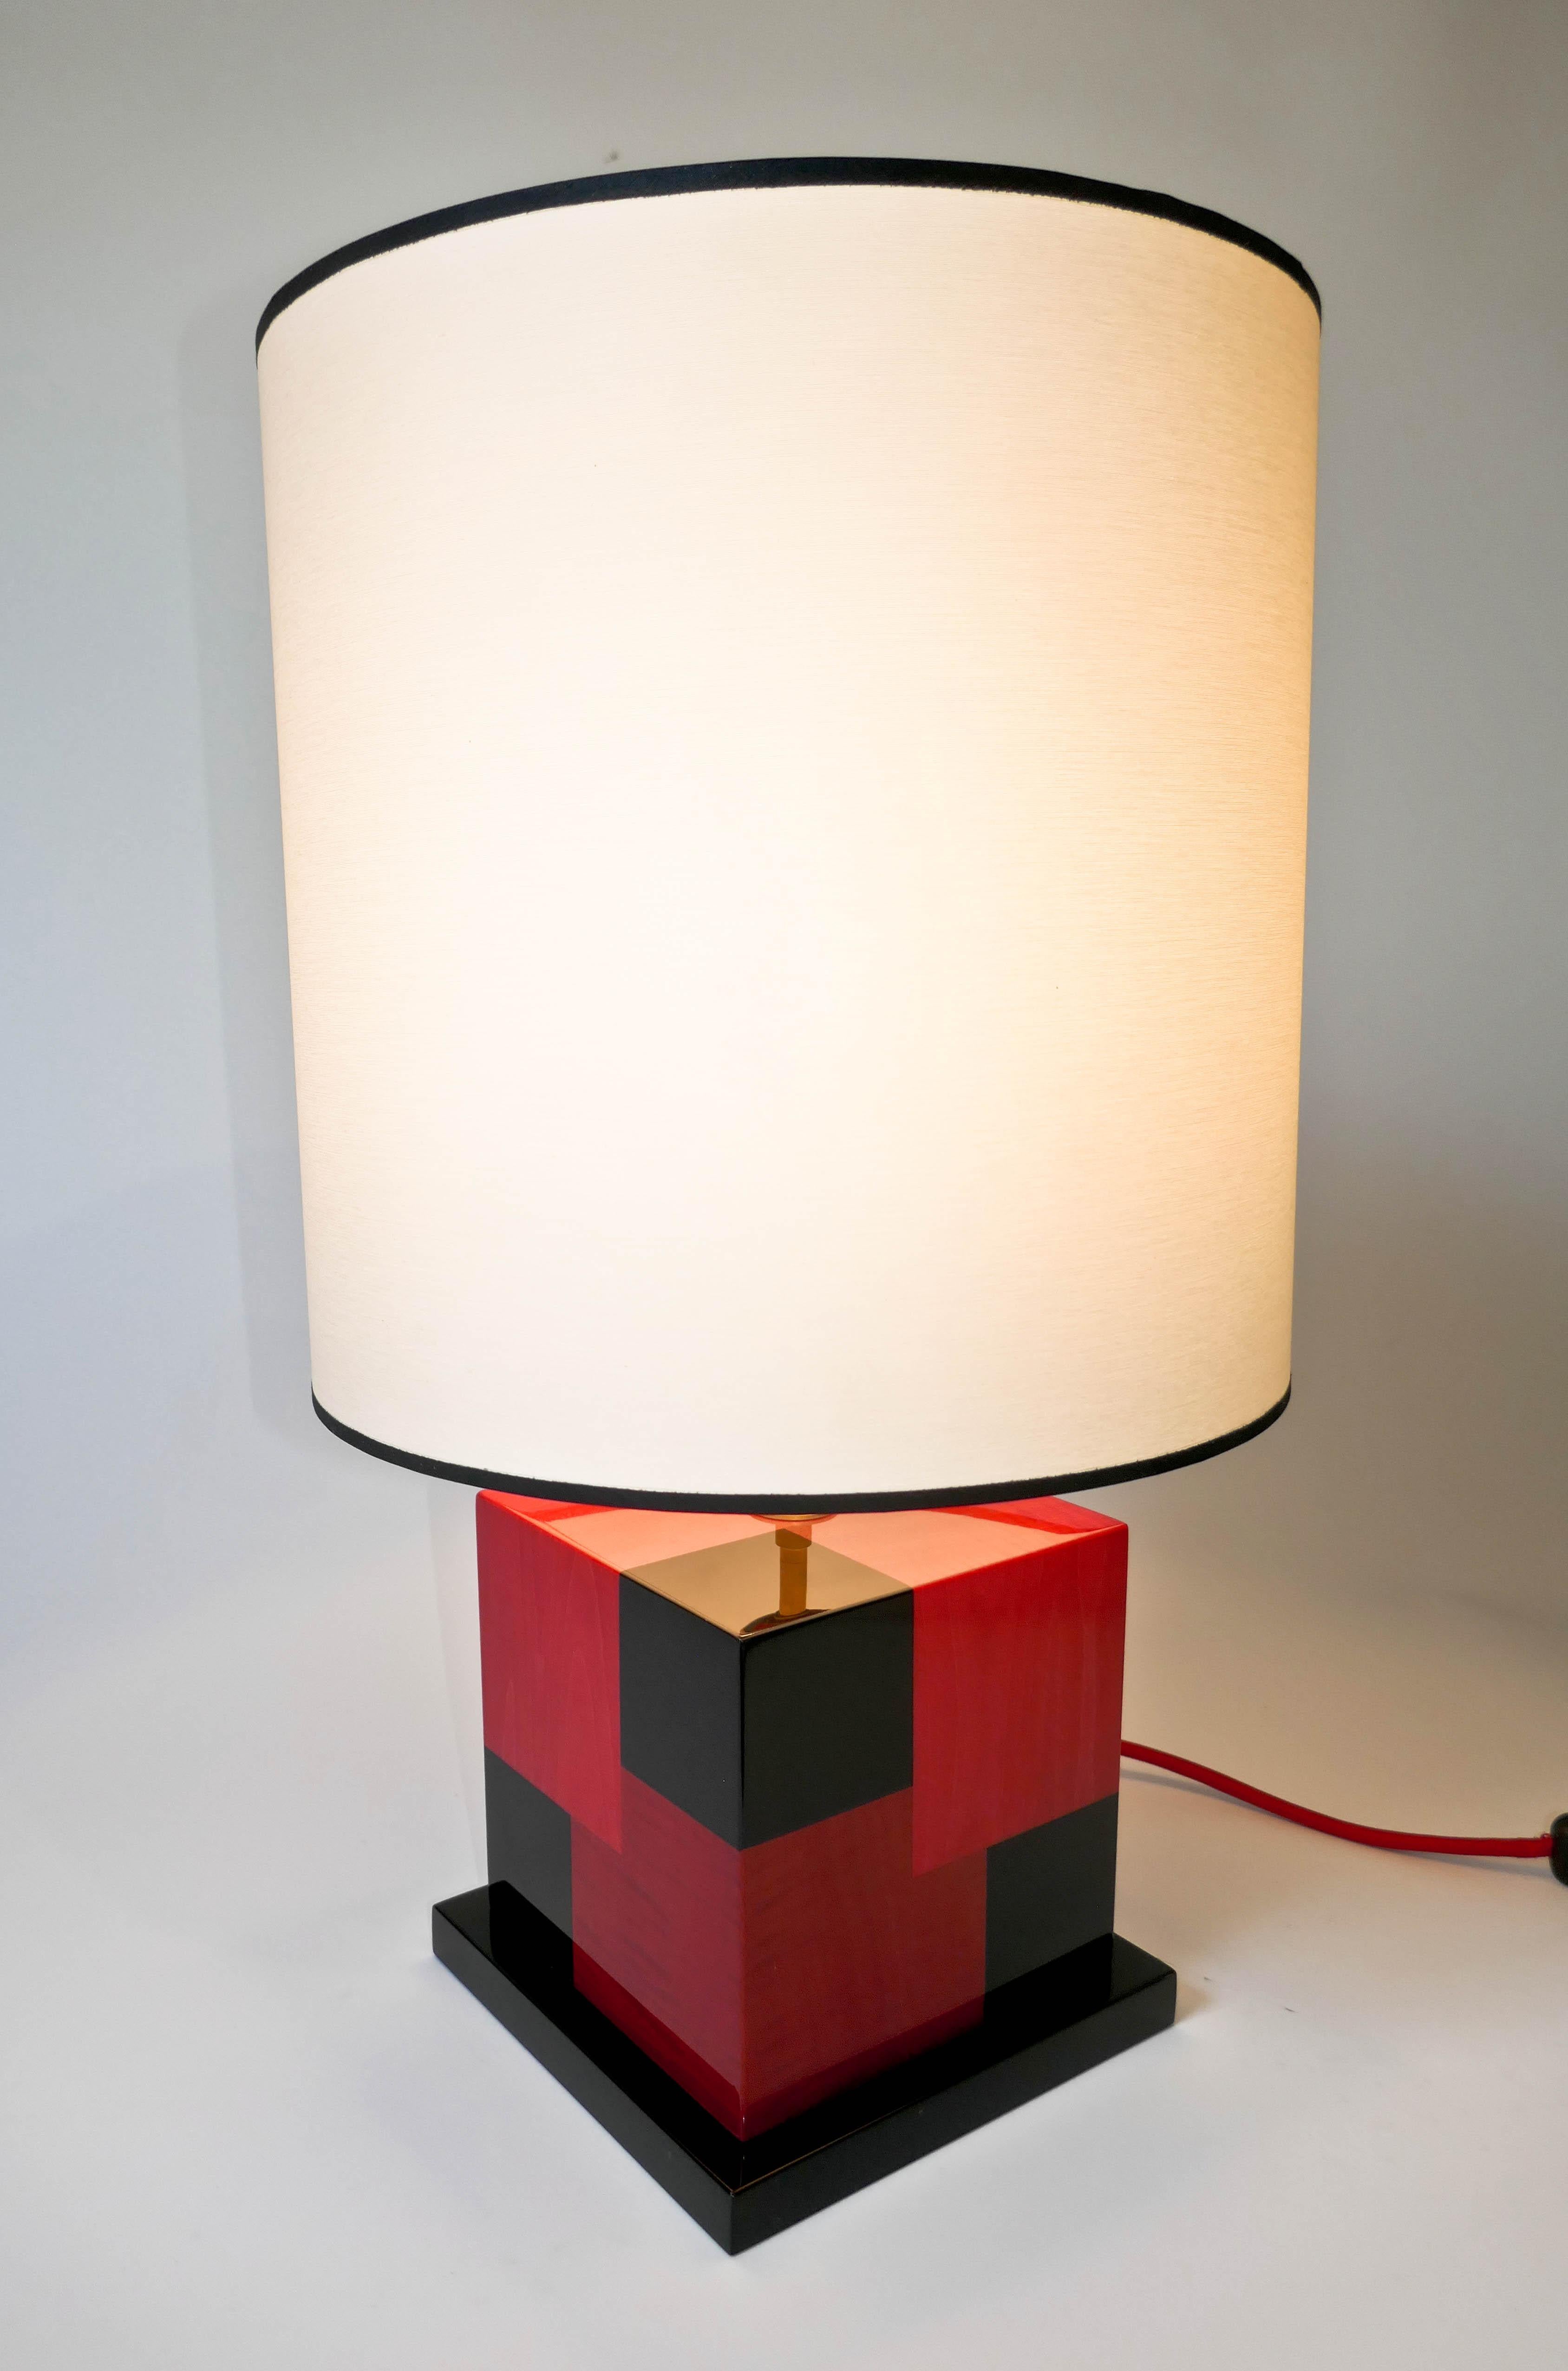 .Table lamp in tinted black, light and dark red sycamore marquetry.
Carefully build in our Parisian workshop this lamp has a kinetic effect using the different colors to create an impression of deepness. The lamp is varnished.  The bulb is a